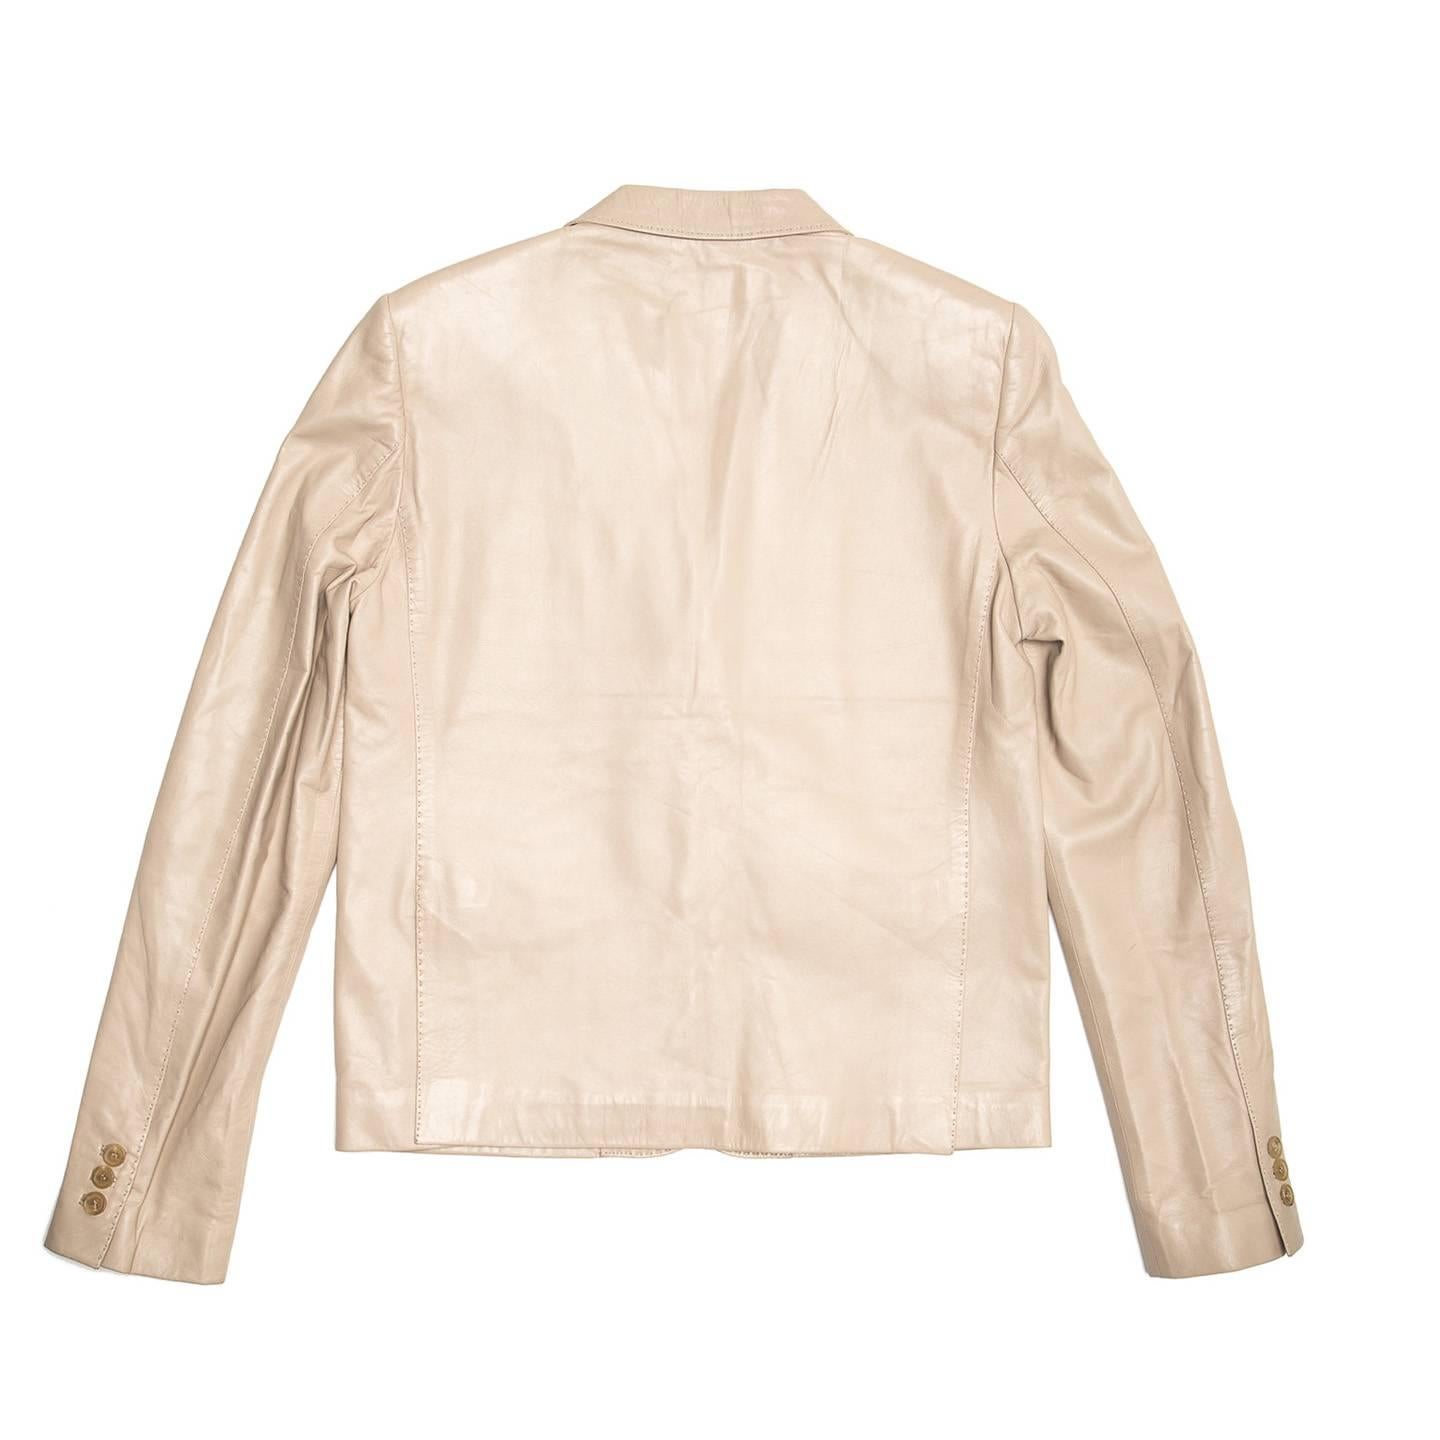 Gucci Khaki Leather Boxy Jacket In Excellent Condition For Sale In Brooklyn, NY